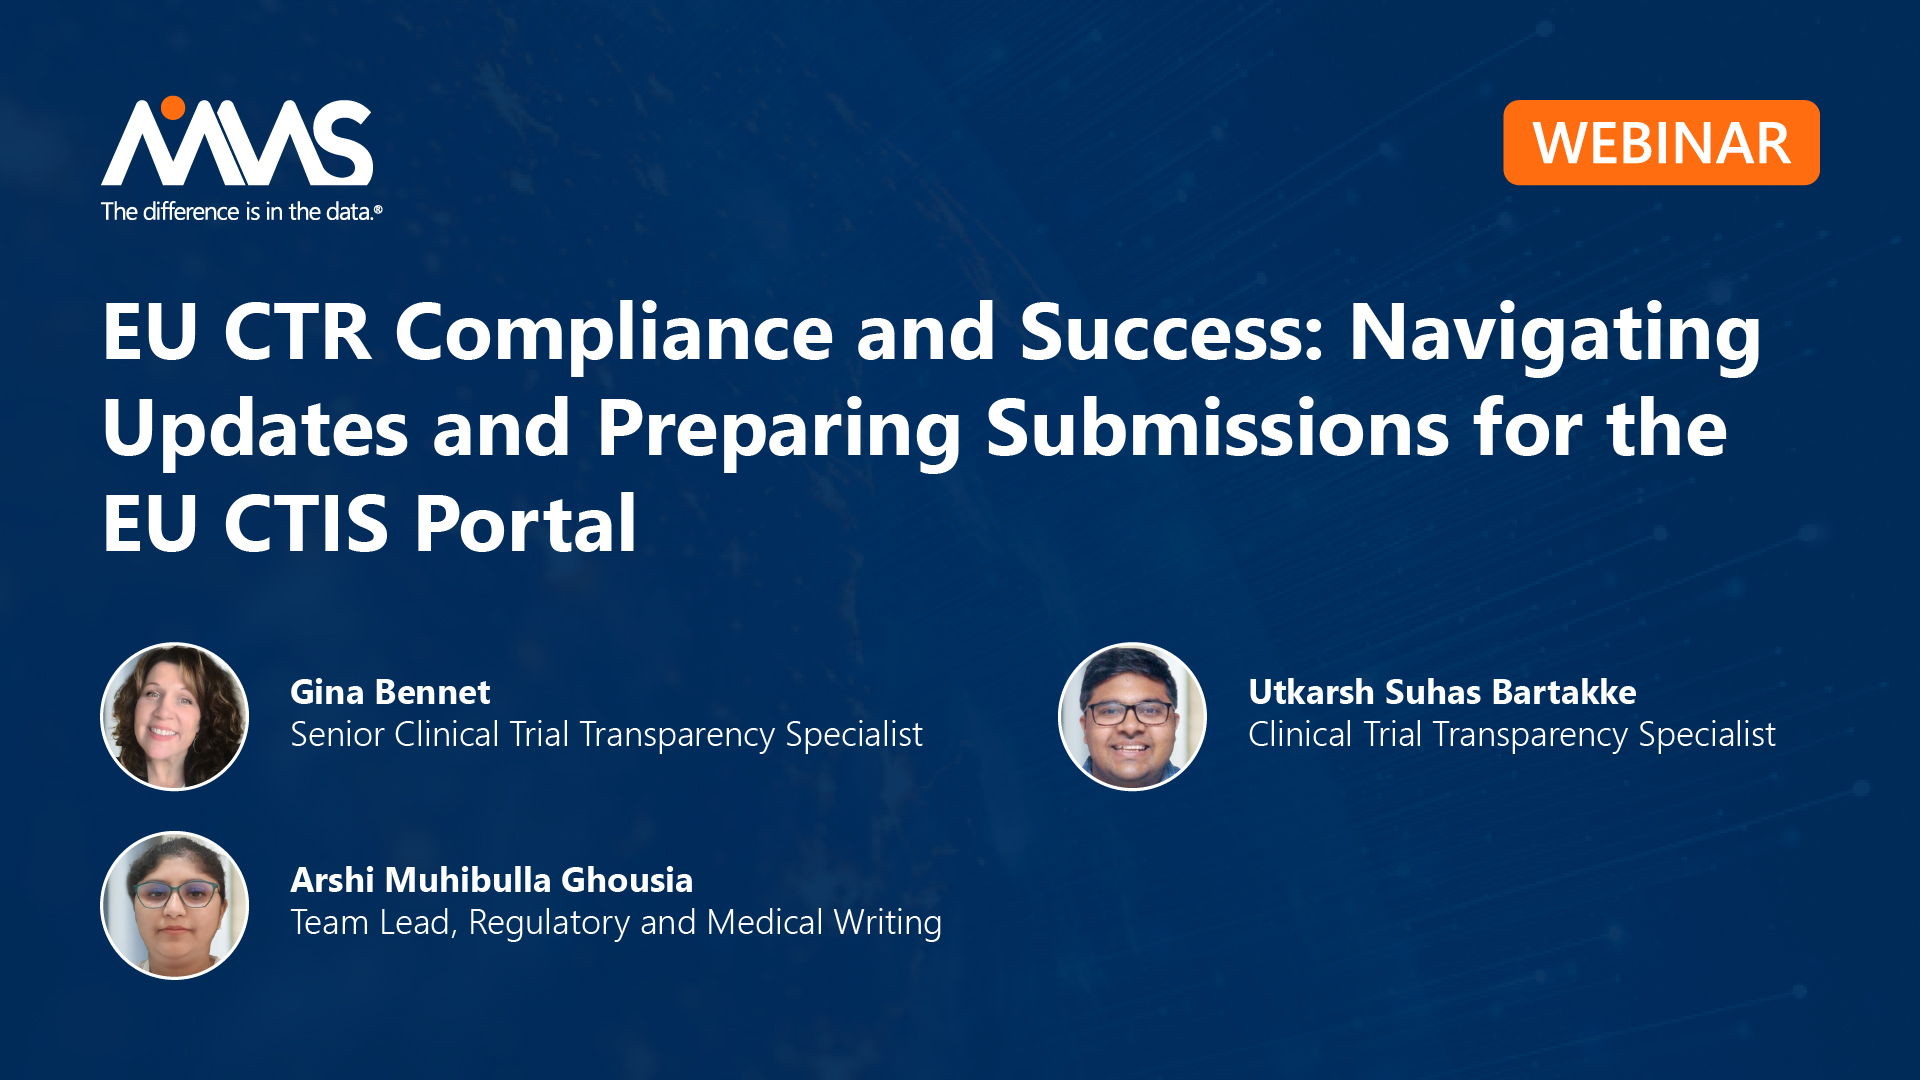 EU CTR Compliance and Success: Navigating Updates and Preparing Submissions for the EU CTIS Portal